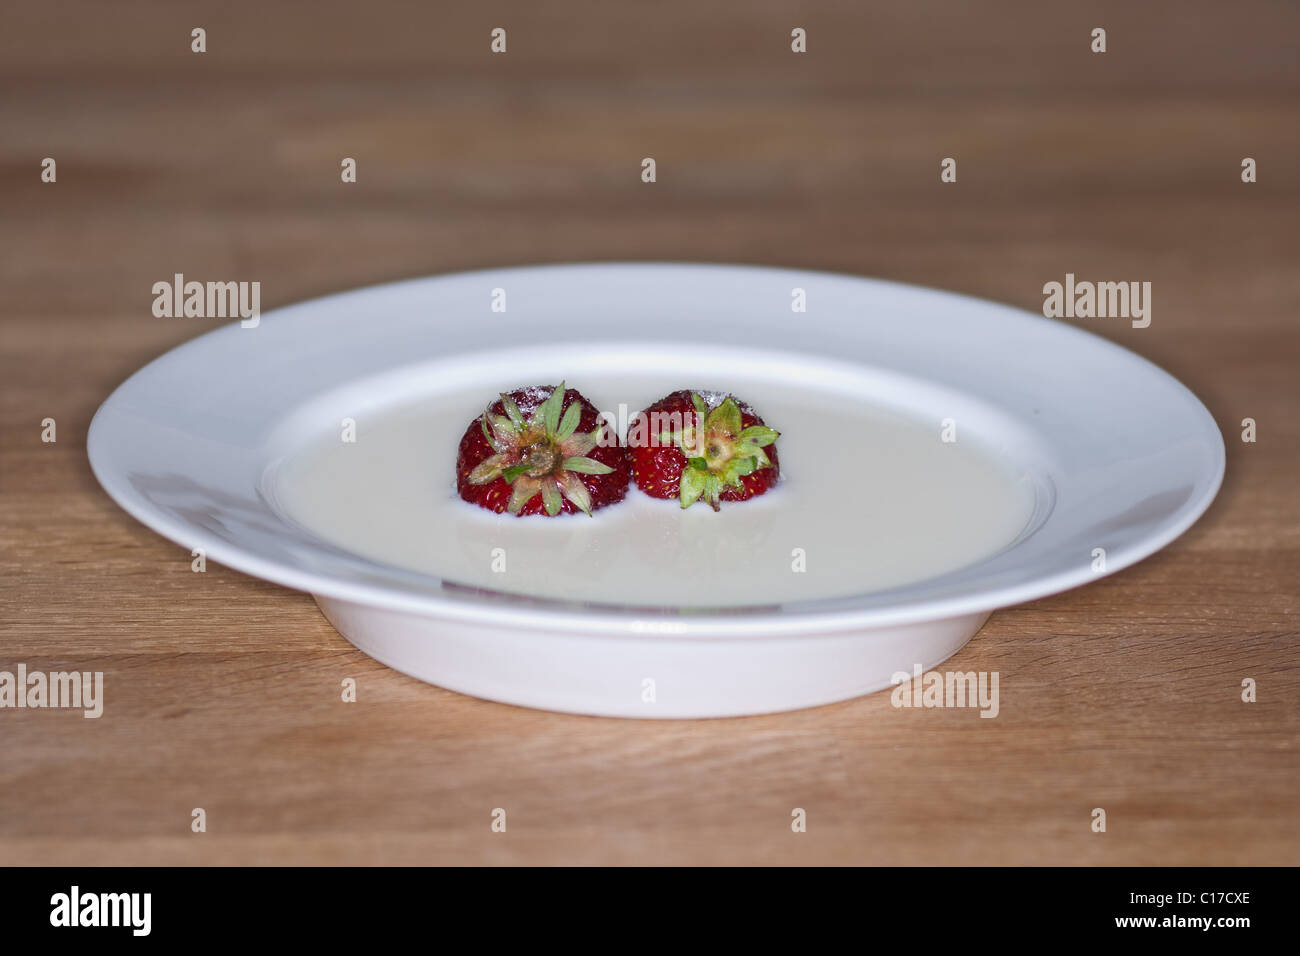 White saucer with fresh strawberries in milk with sugar poured over. Placed on wooden table Stock Photo